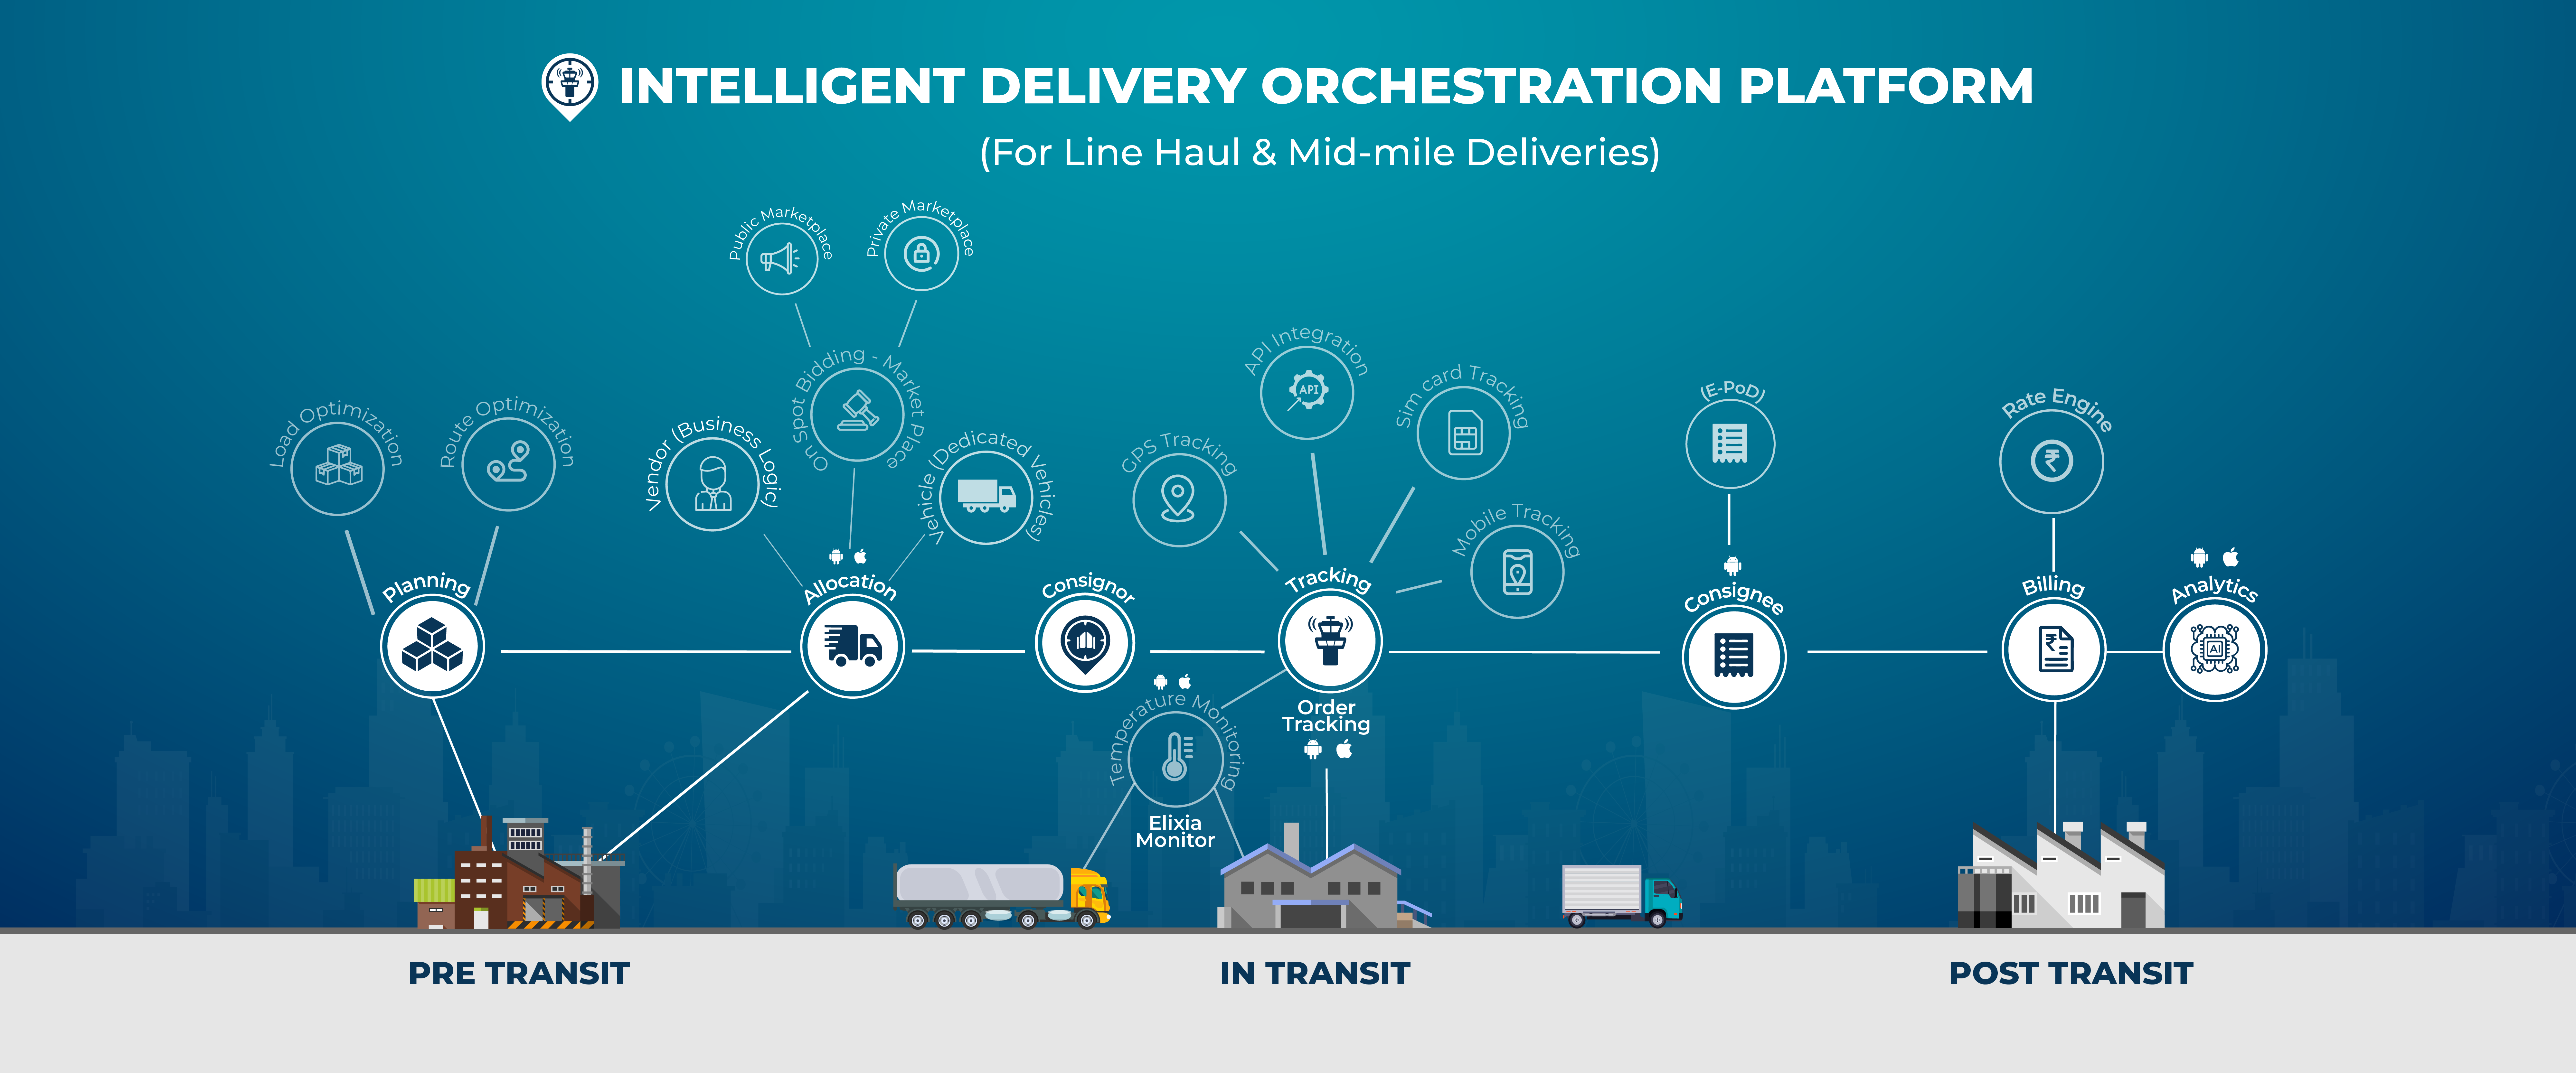 Get supply chain visibility on line haul deliveries